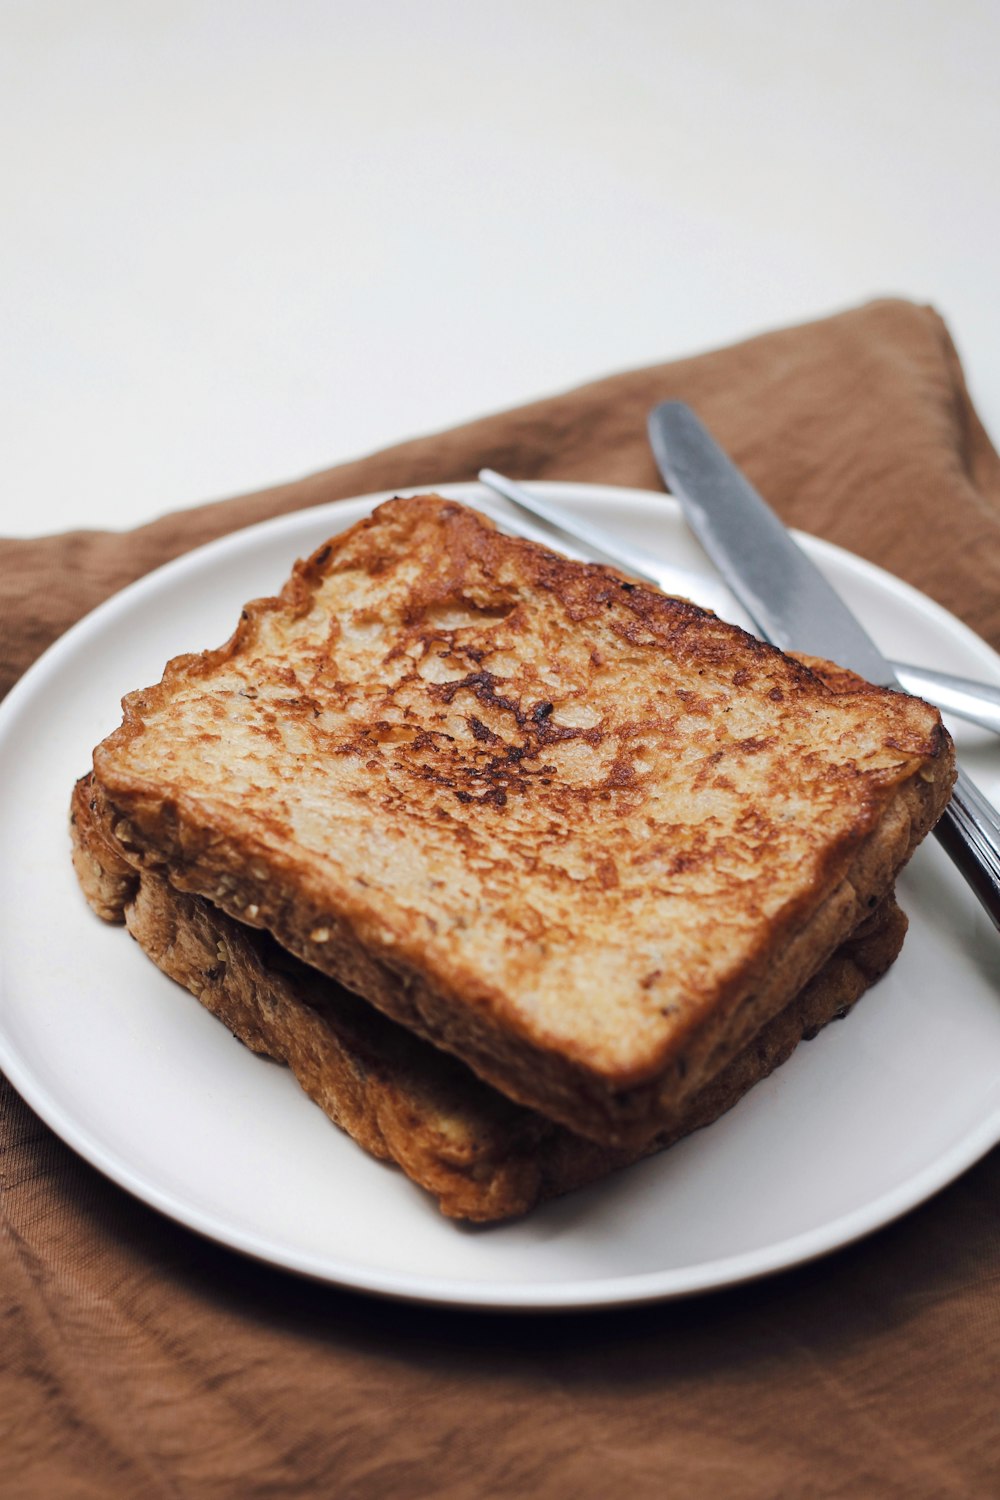 a grilled cheese sandwich on a plate with a fork